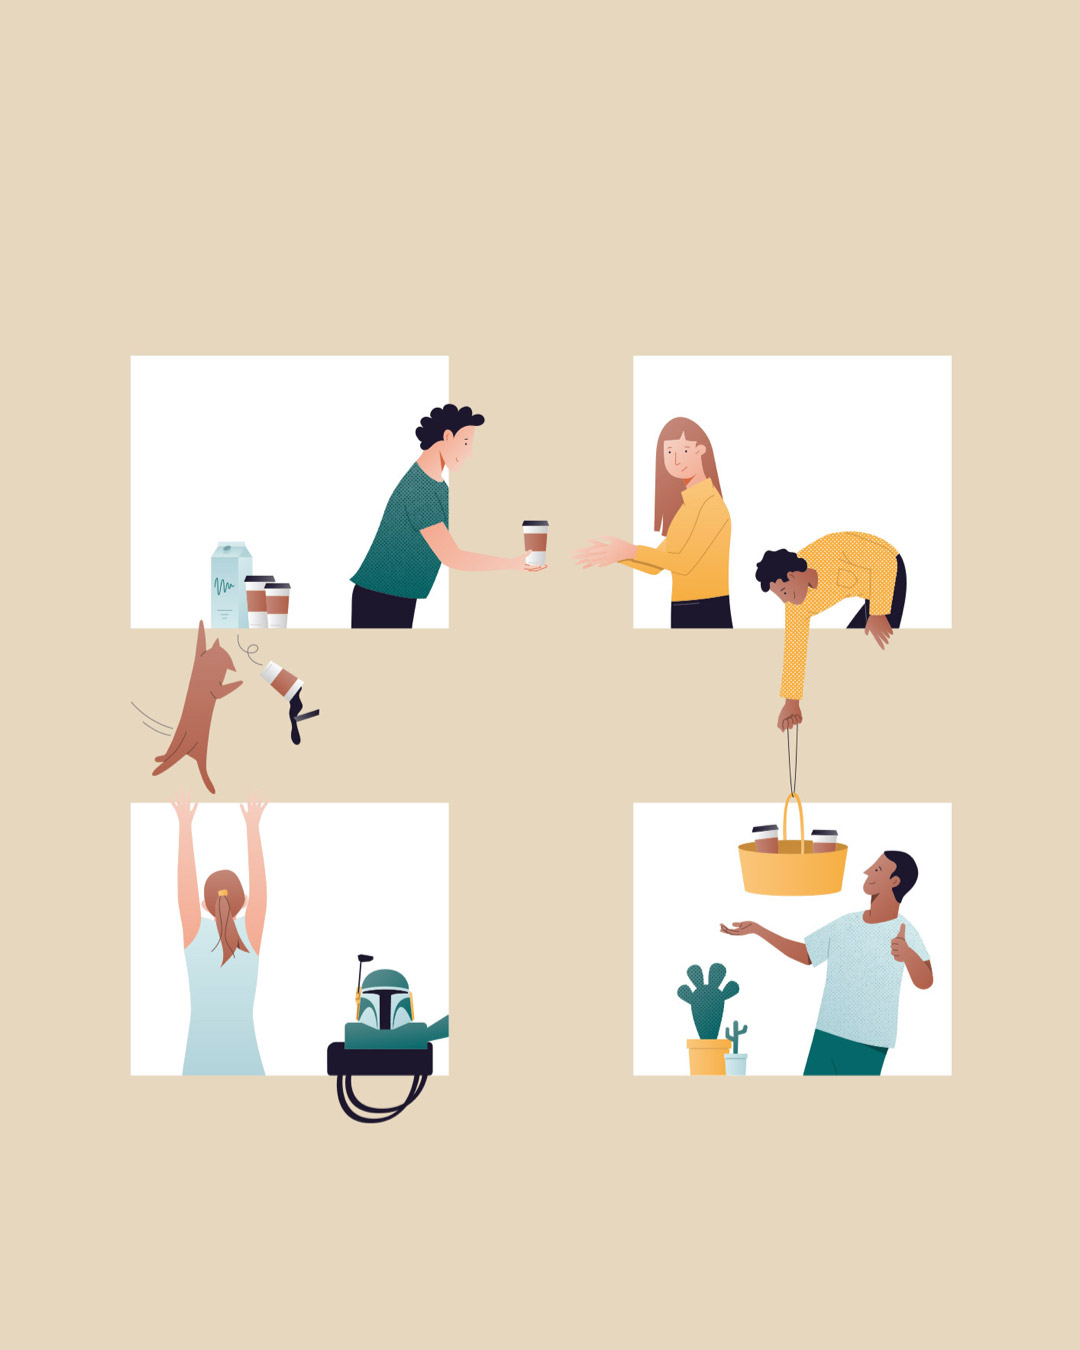 Illustrating the five core values of digital agency TreeHouse